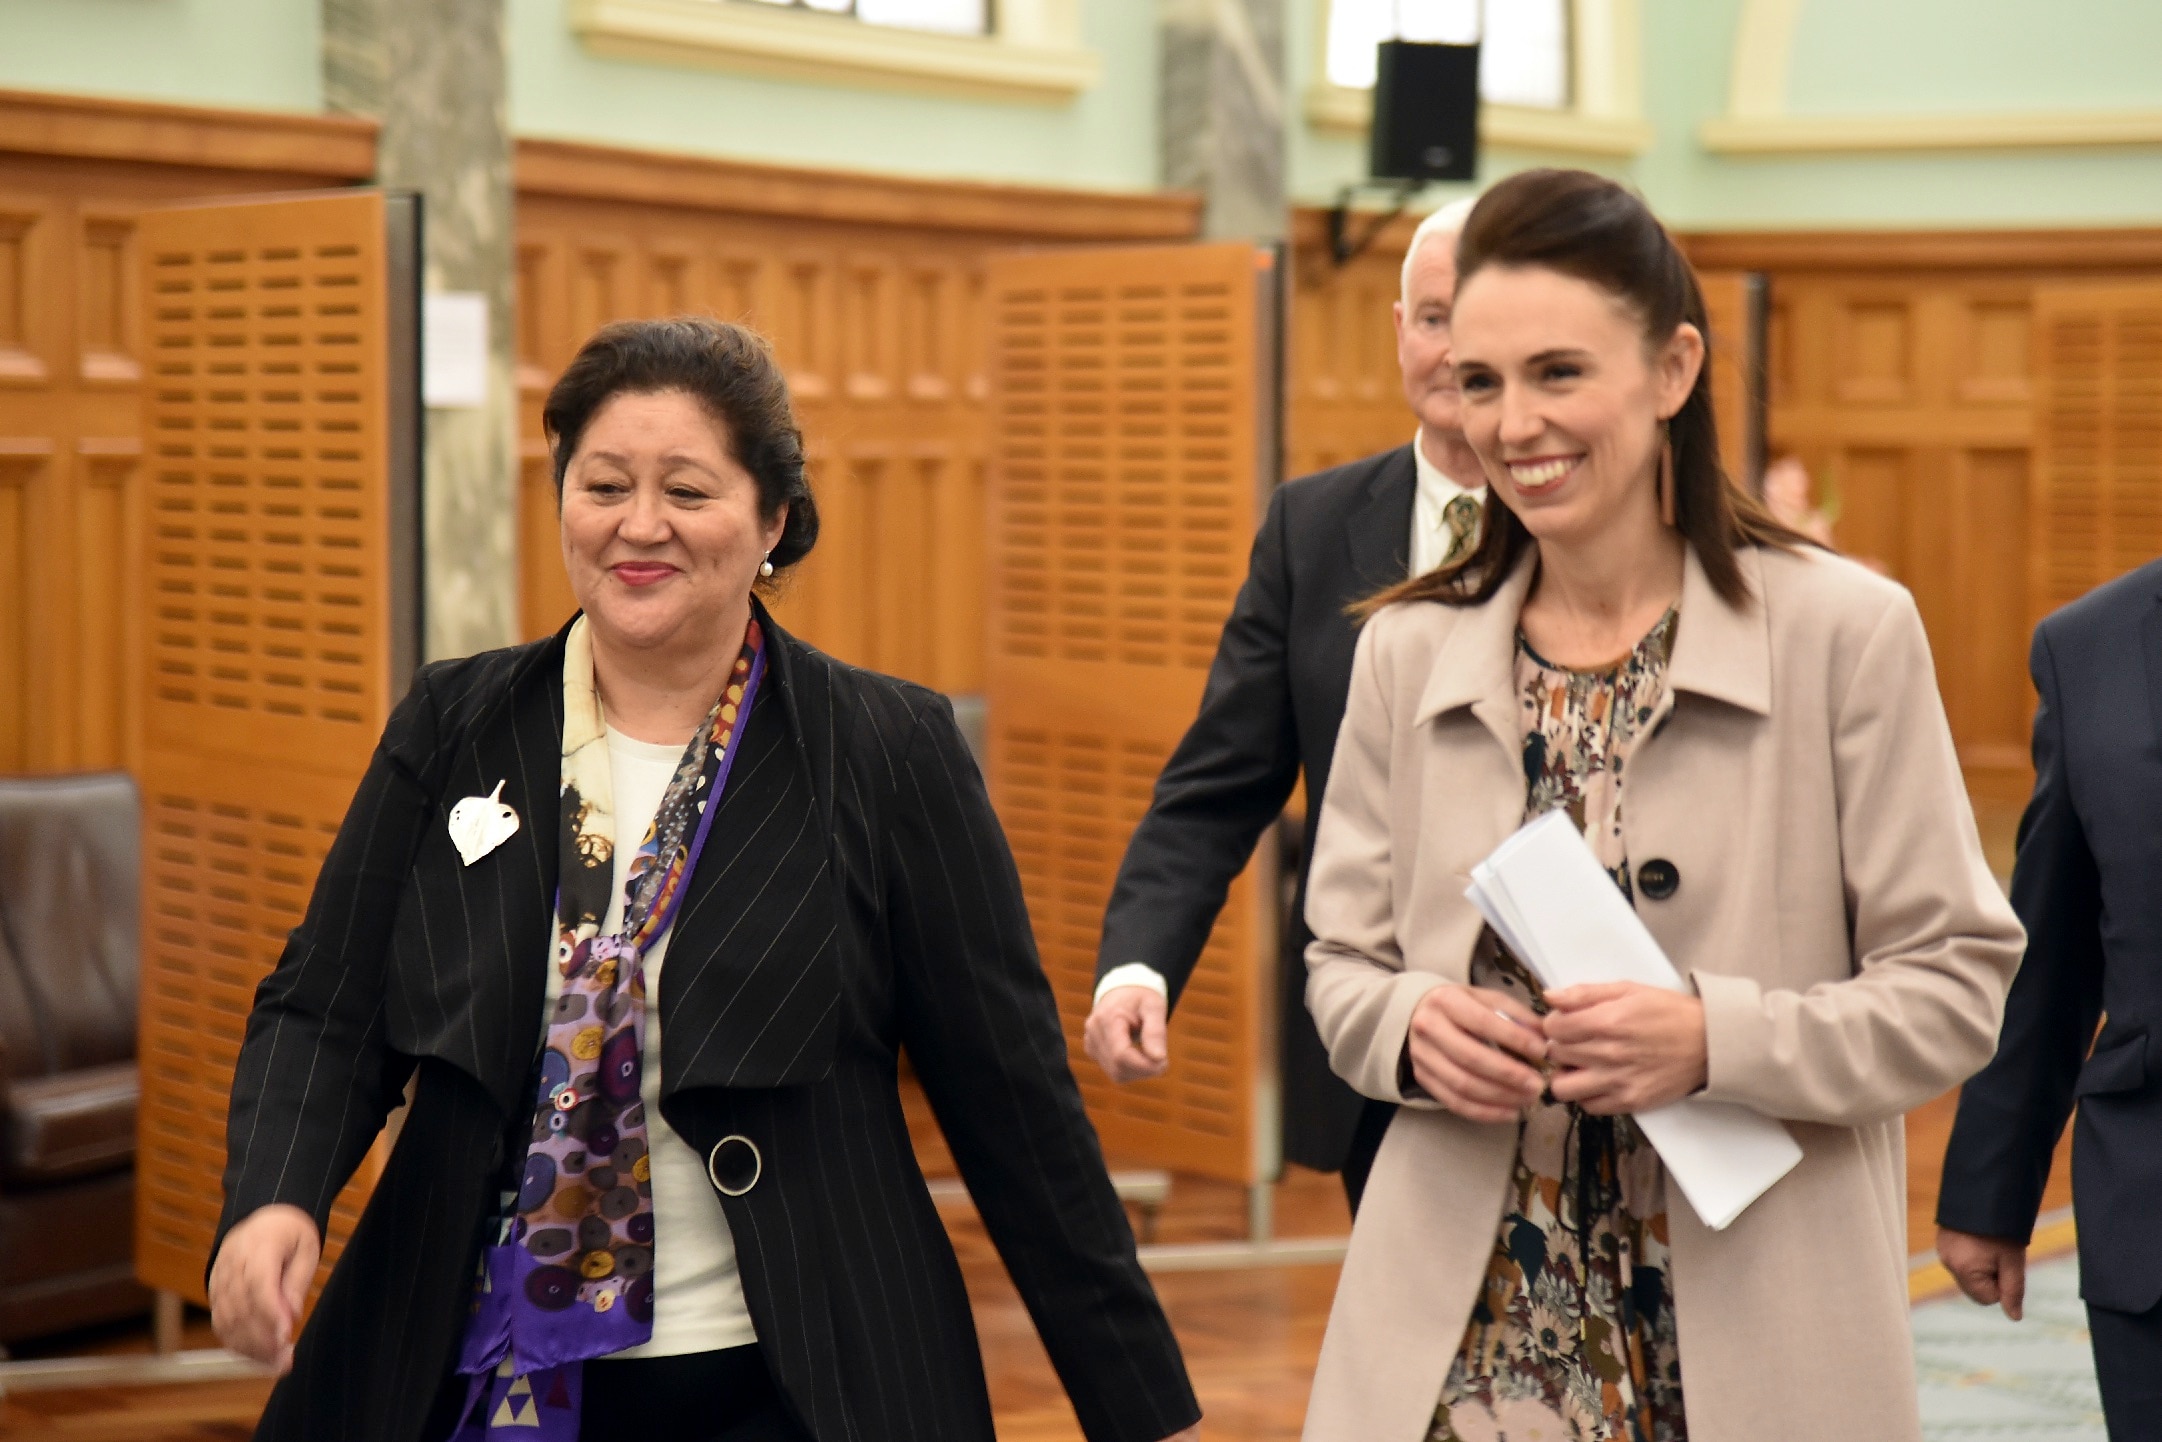 New Zealand governor-general Dame Cindy Kiro and Prime Minister Jacinda Ardern at Parliament House in Wellington on 24 May 2021.